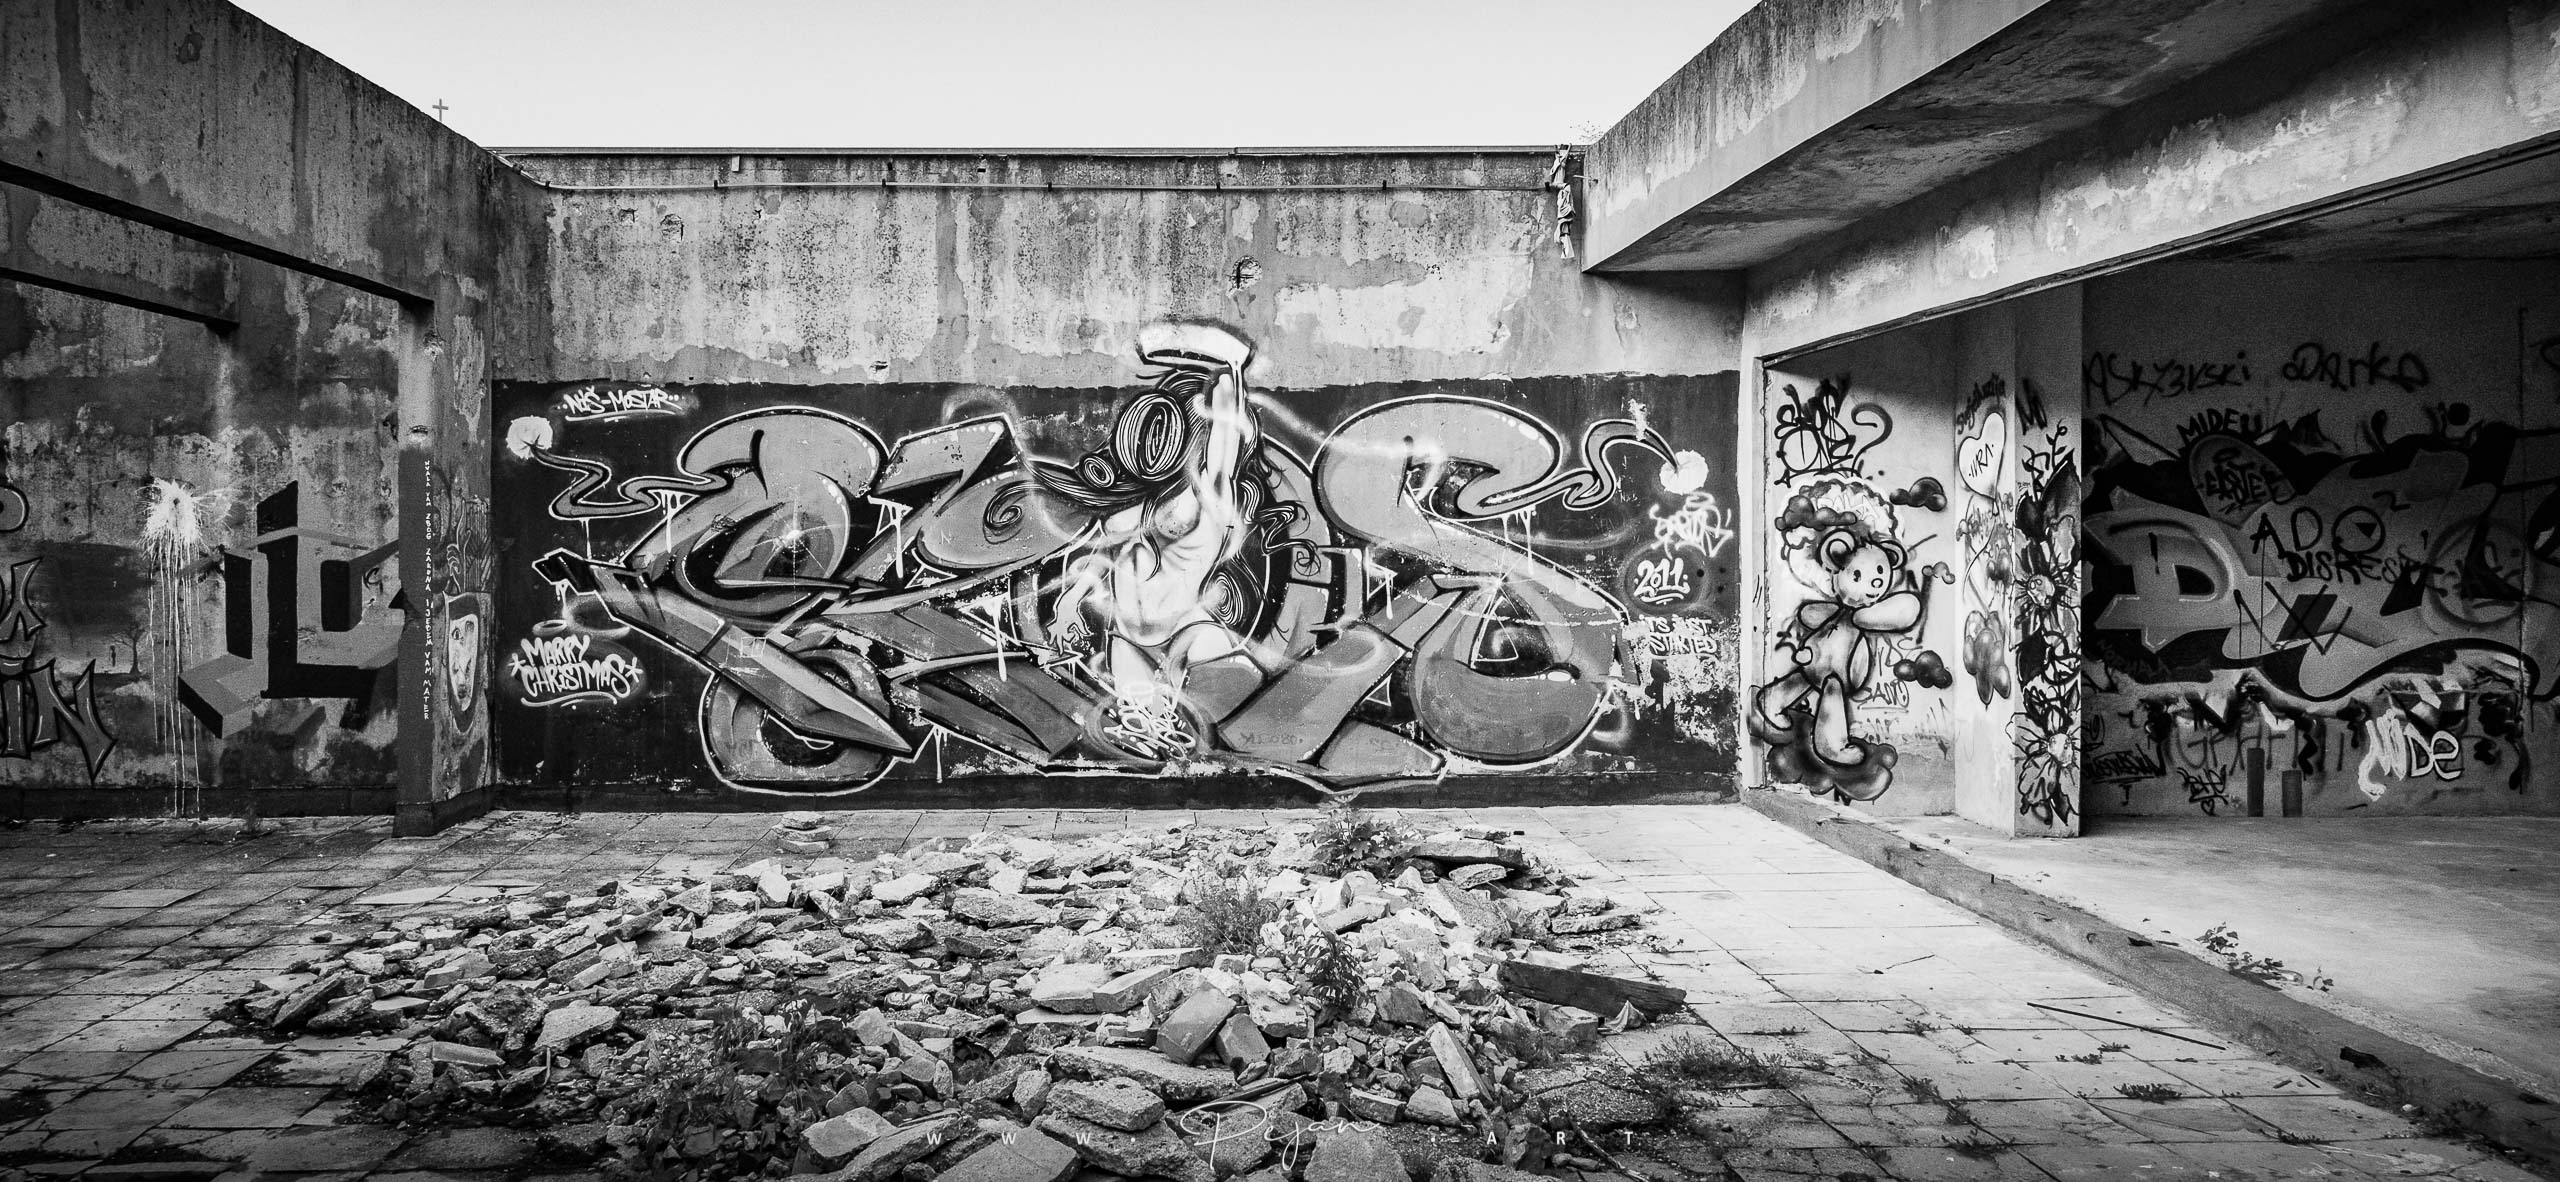 Urbex Black and White Photography, Street art on the top floor of the famous Sniper Tower in Mostar in Bosnia-Herzegovina. The building is a former bank left abandoned since the Bosnian war.